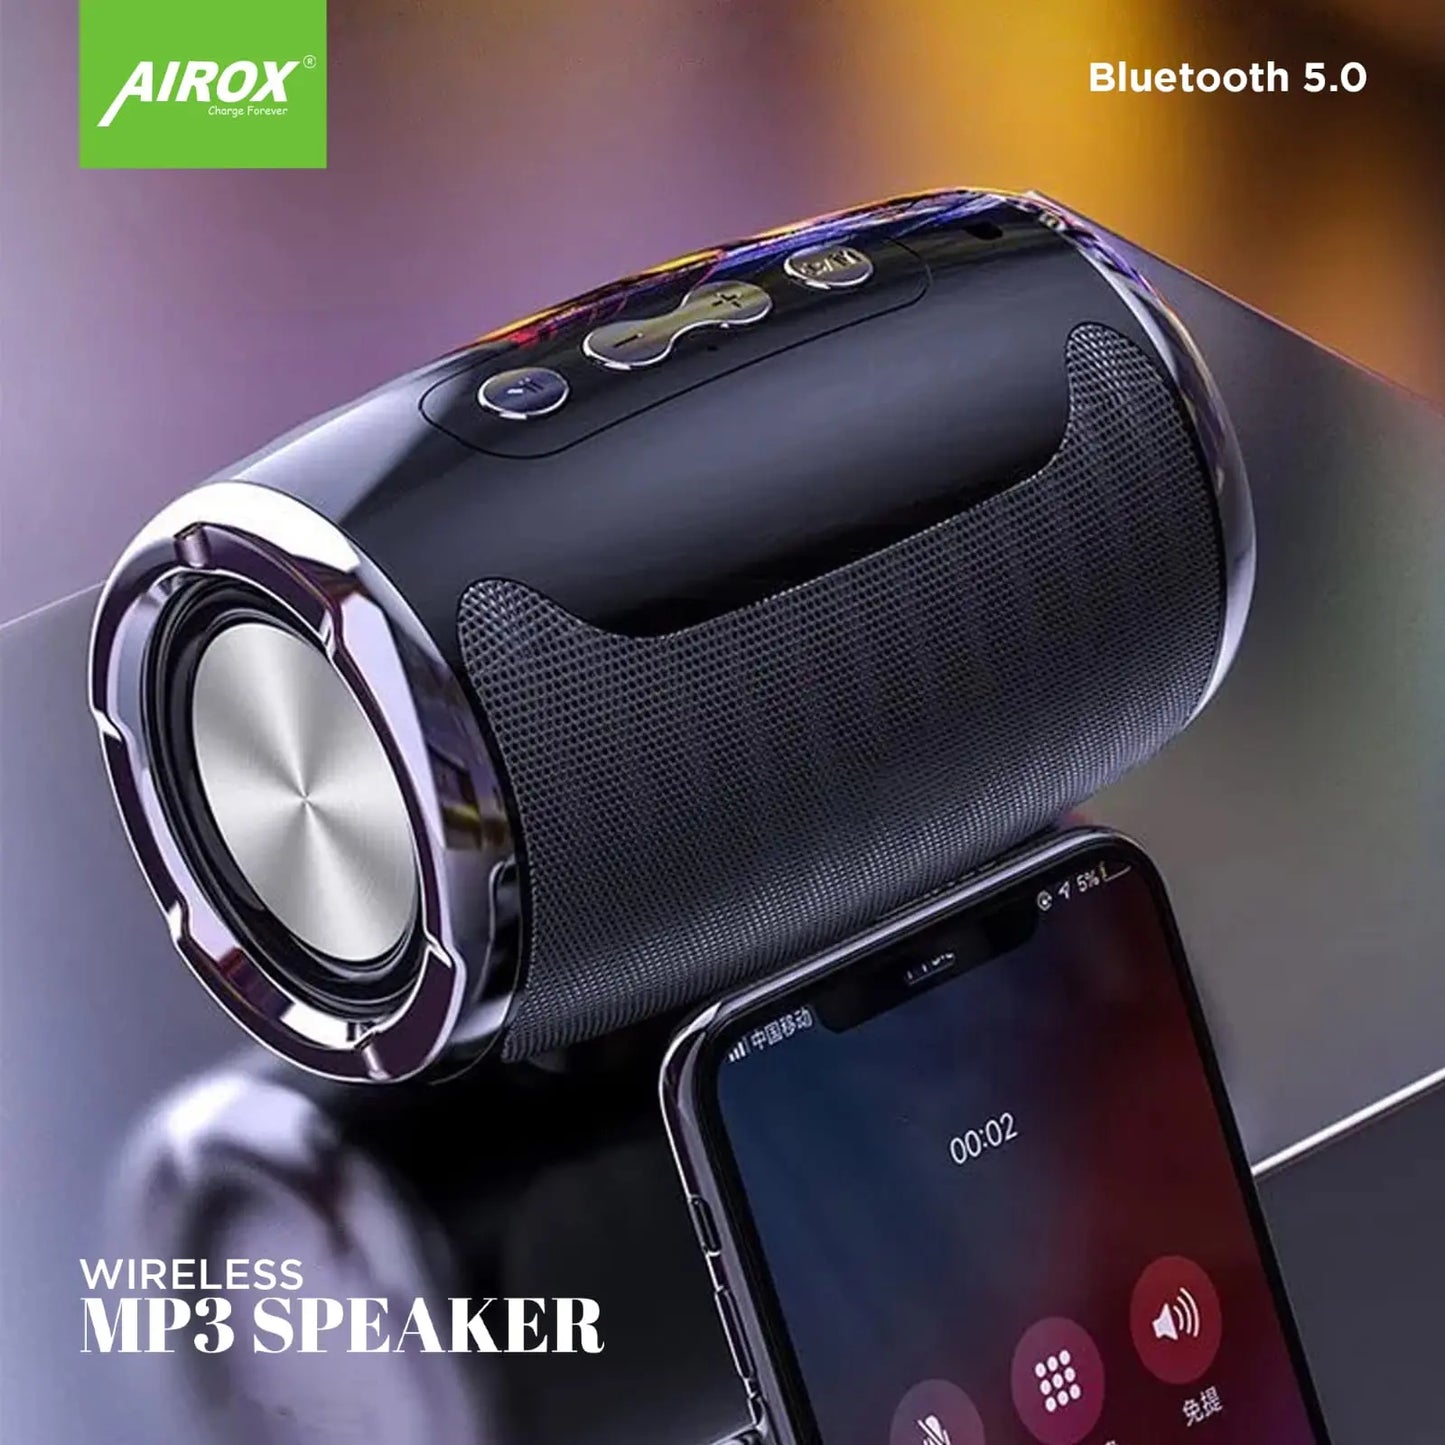 Airox Wireless Bluetooth Speakers Woofer Portable  Speakers Bass Speaker Stereo Music Surround Mobile Call Light Speaker Outdoor Speakers with Aux Interface Laptop Phone Support TF FM - Airox.pk